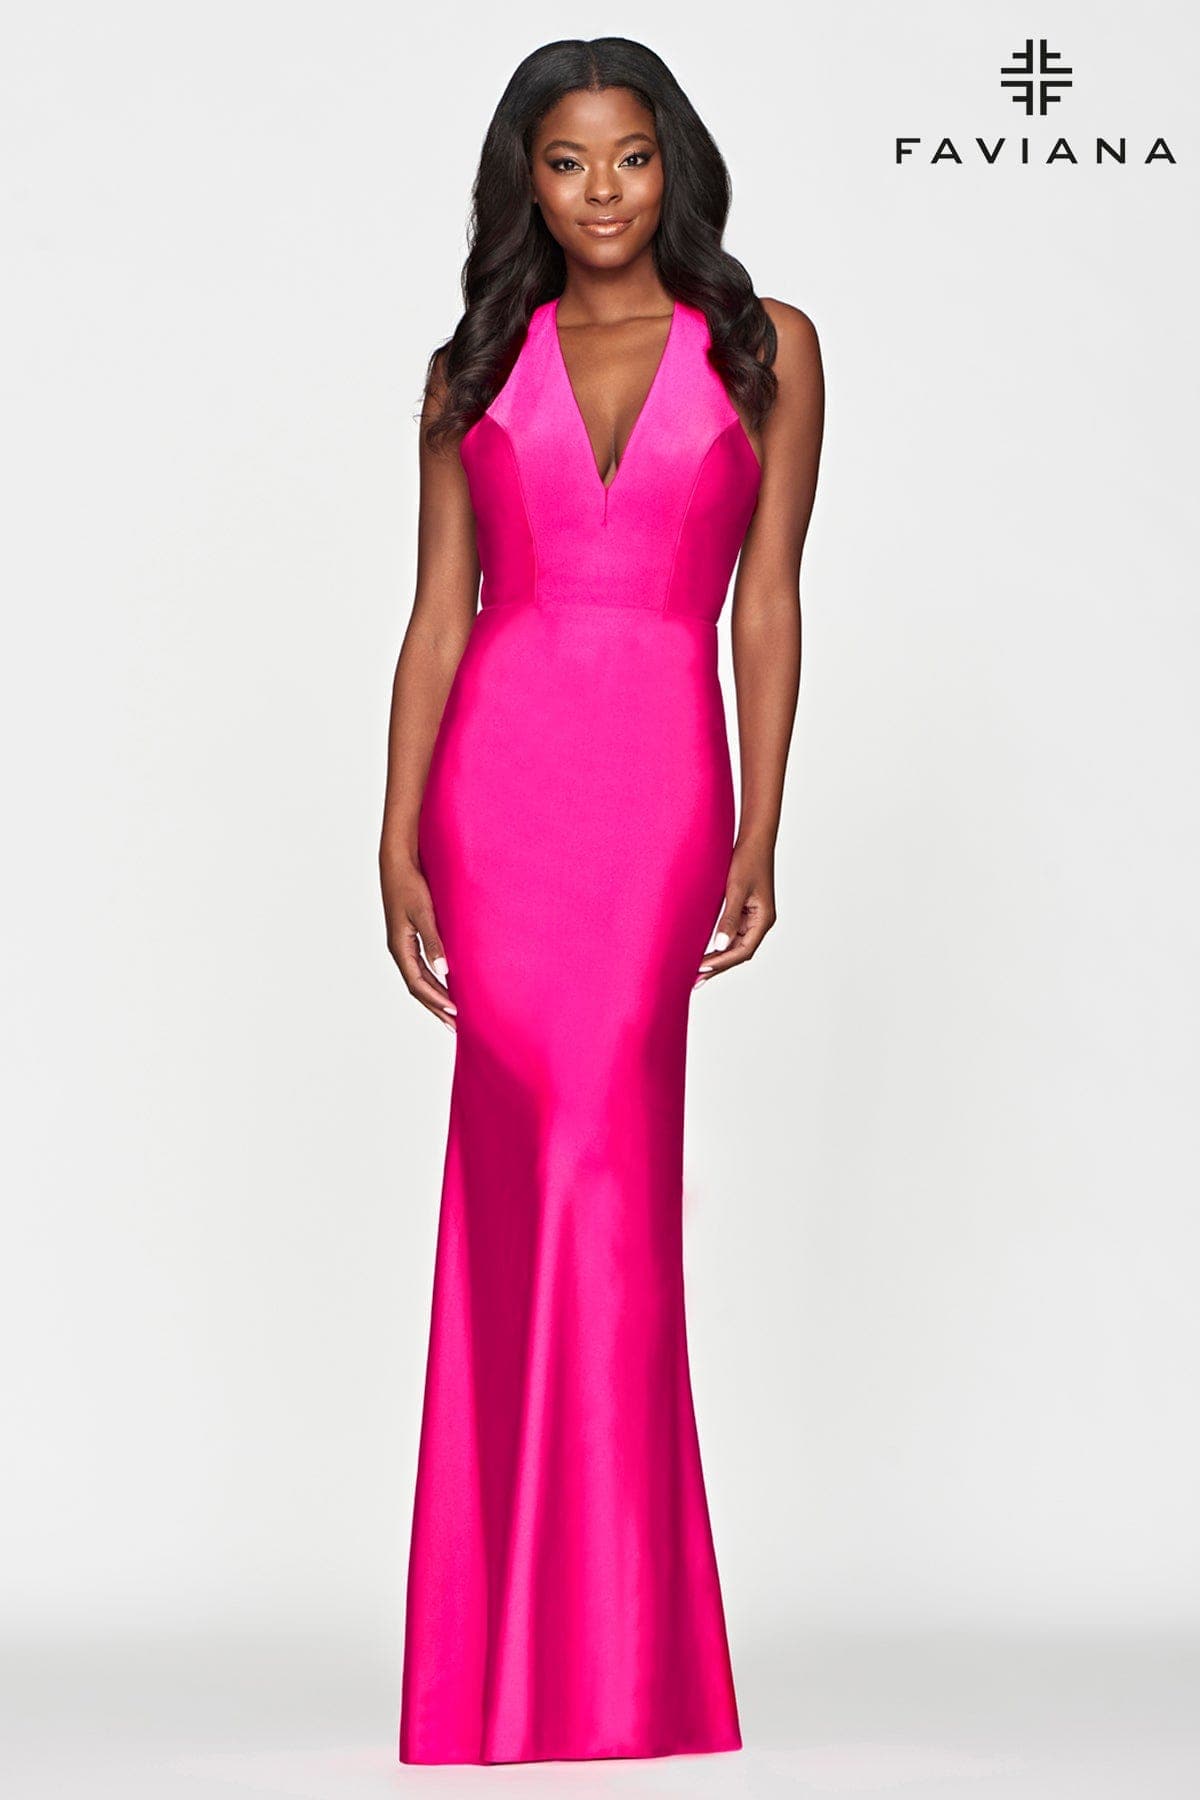 Hot Pink Tight Long V Neckline Dress With Halter Neck And Open Back